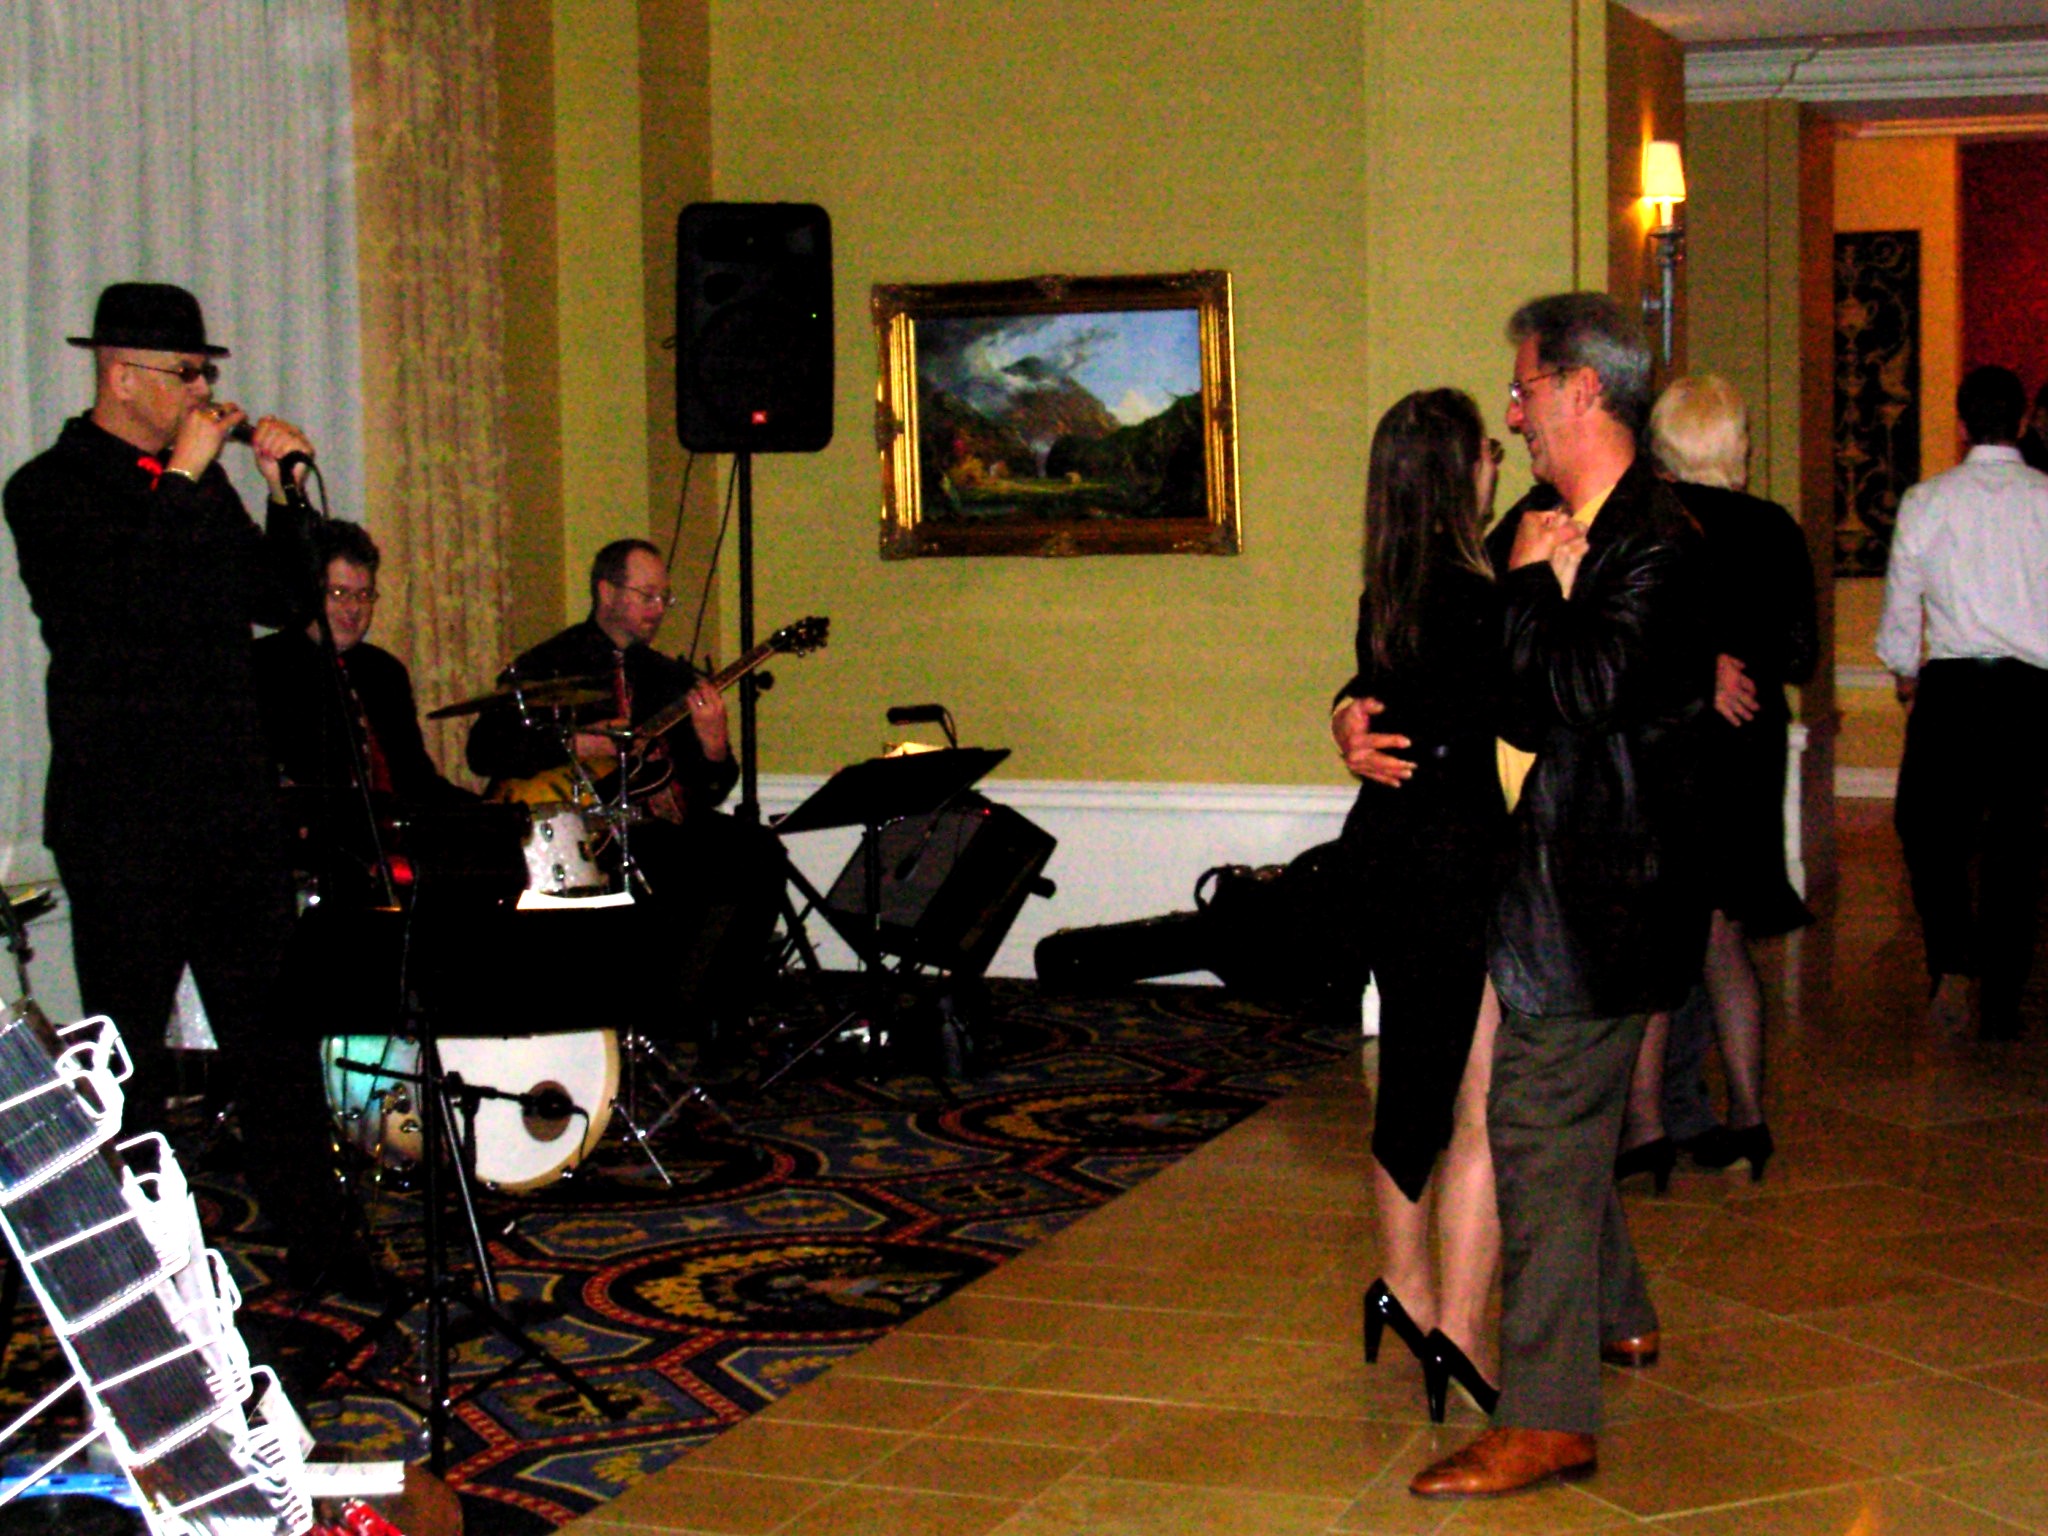 Dancing couples at the Wyndham in Gettysburg
